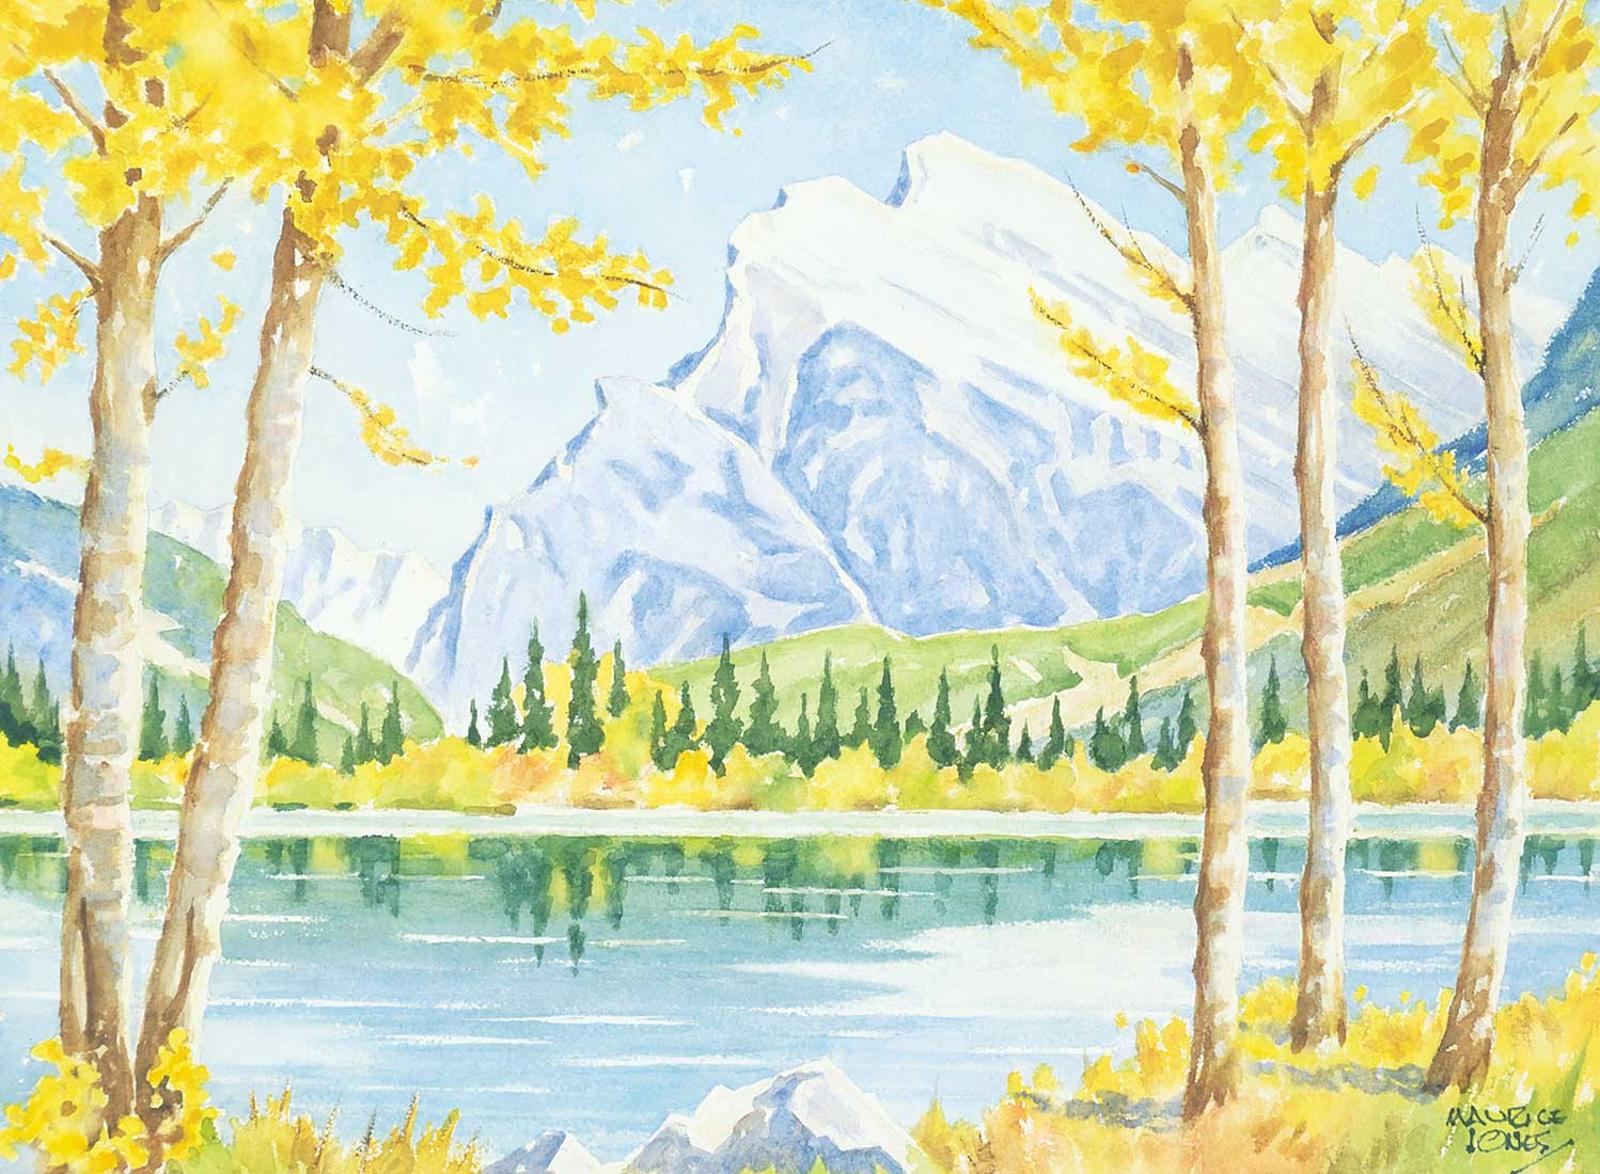 Maurice Jones - Untitled - Mount Rundle in Fall